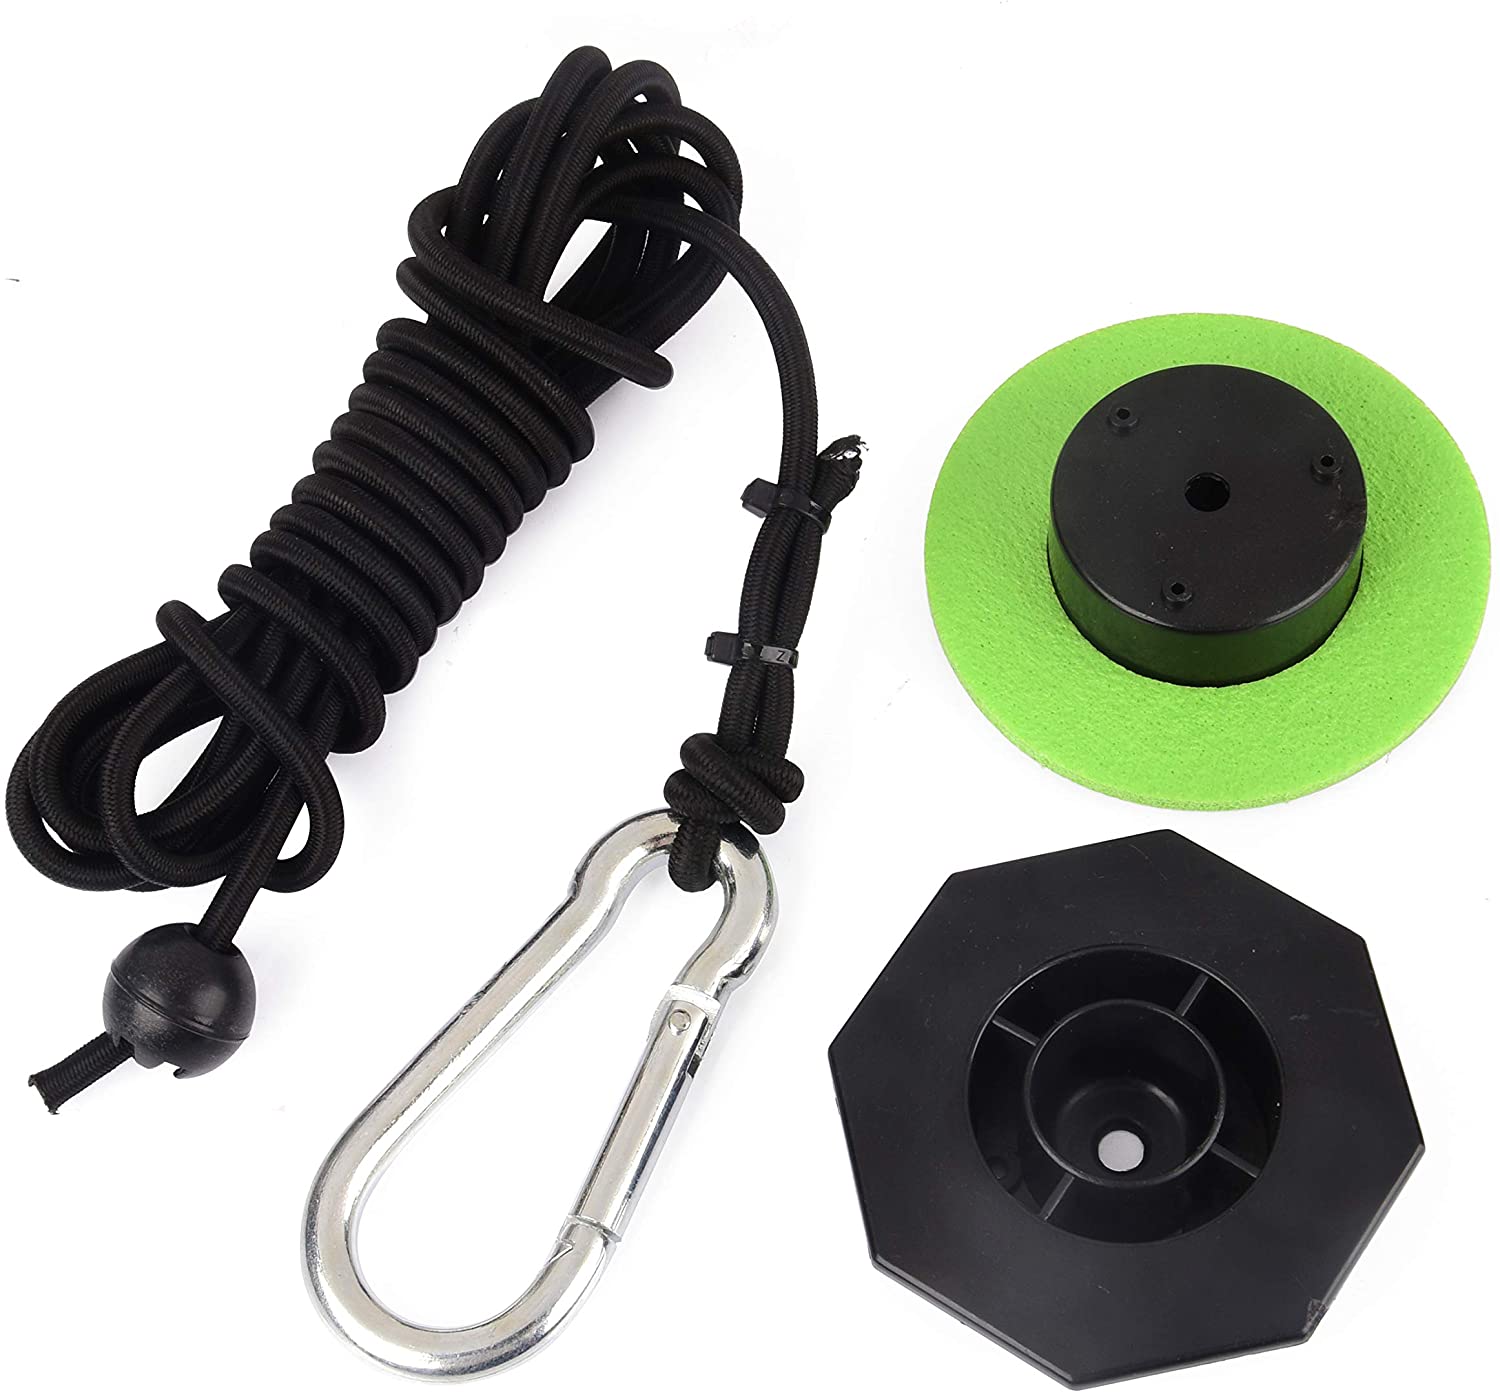 Tether and Grommet Kit – sowkt